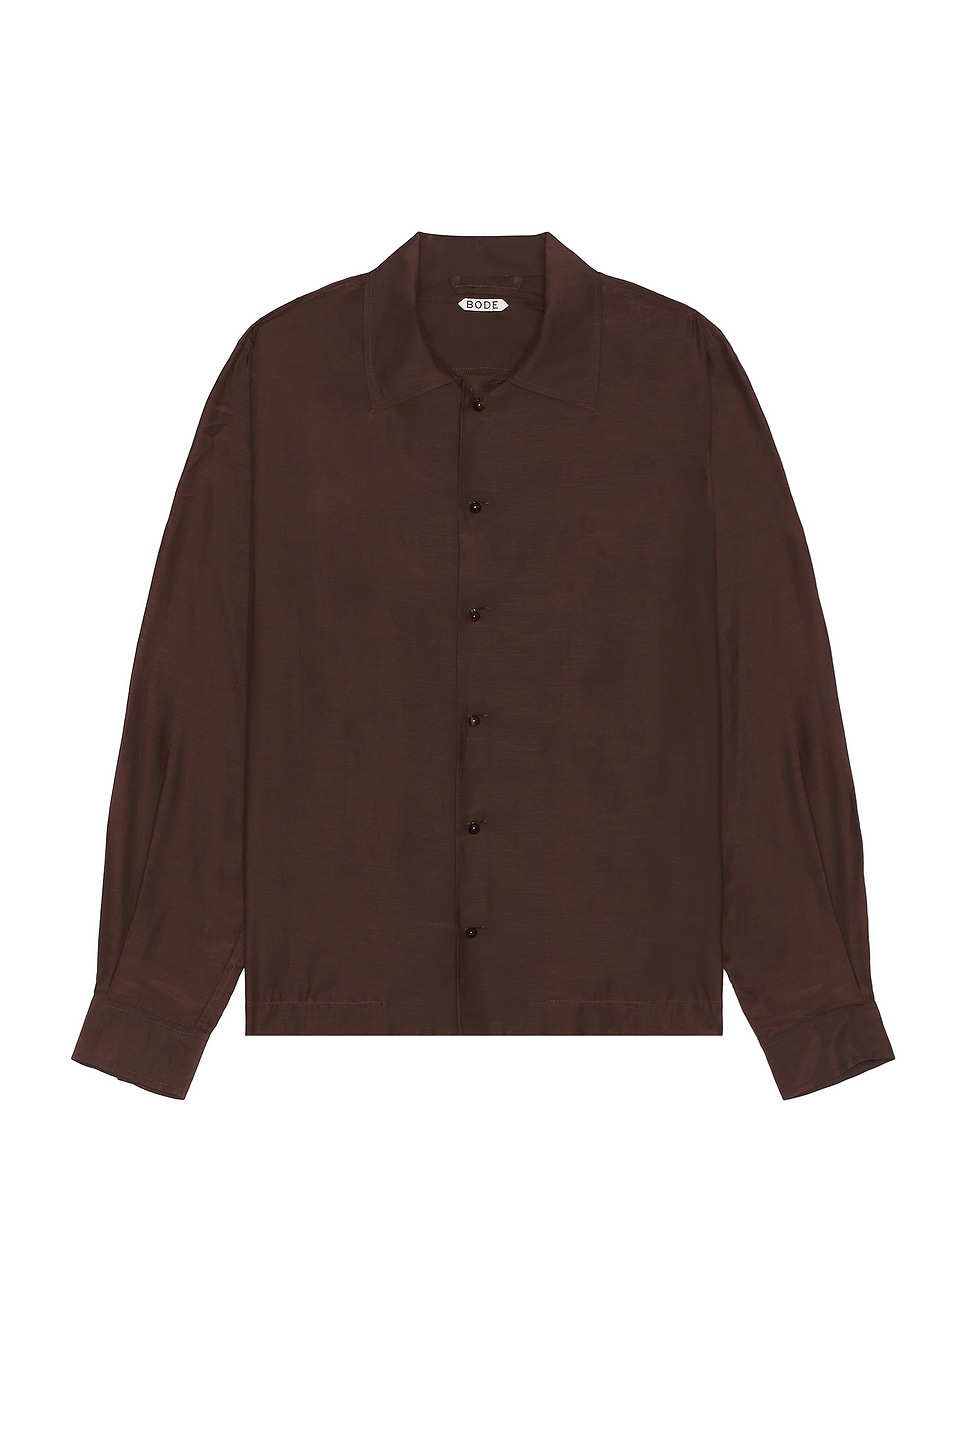 Image 1 of BODE Heartwood Long Sleeve Shirt in Brown